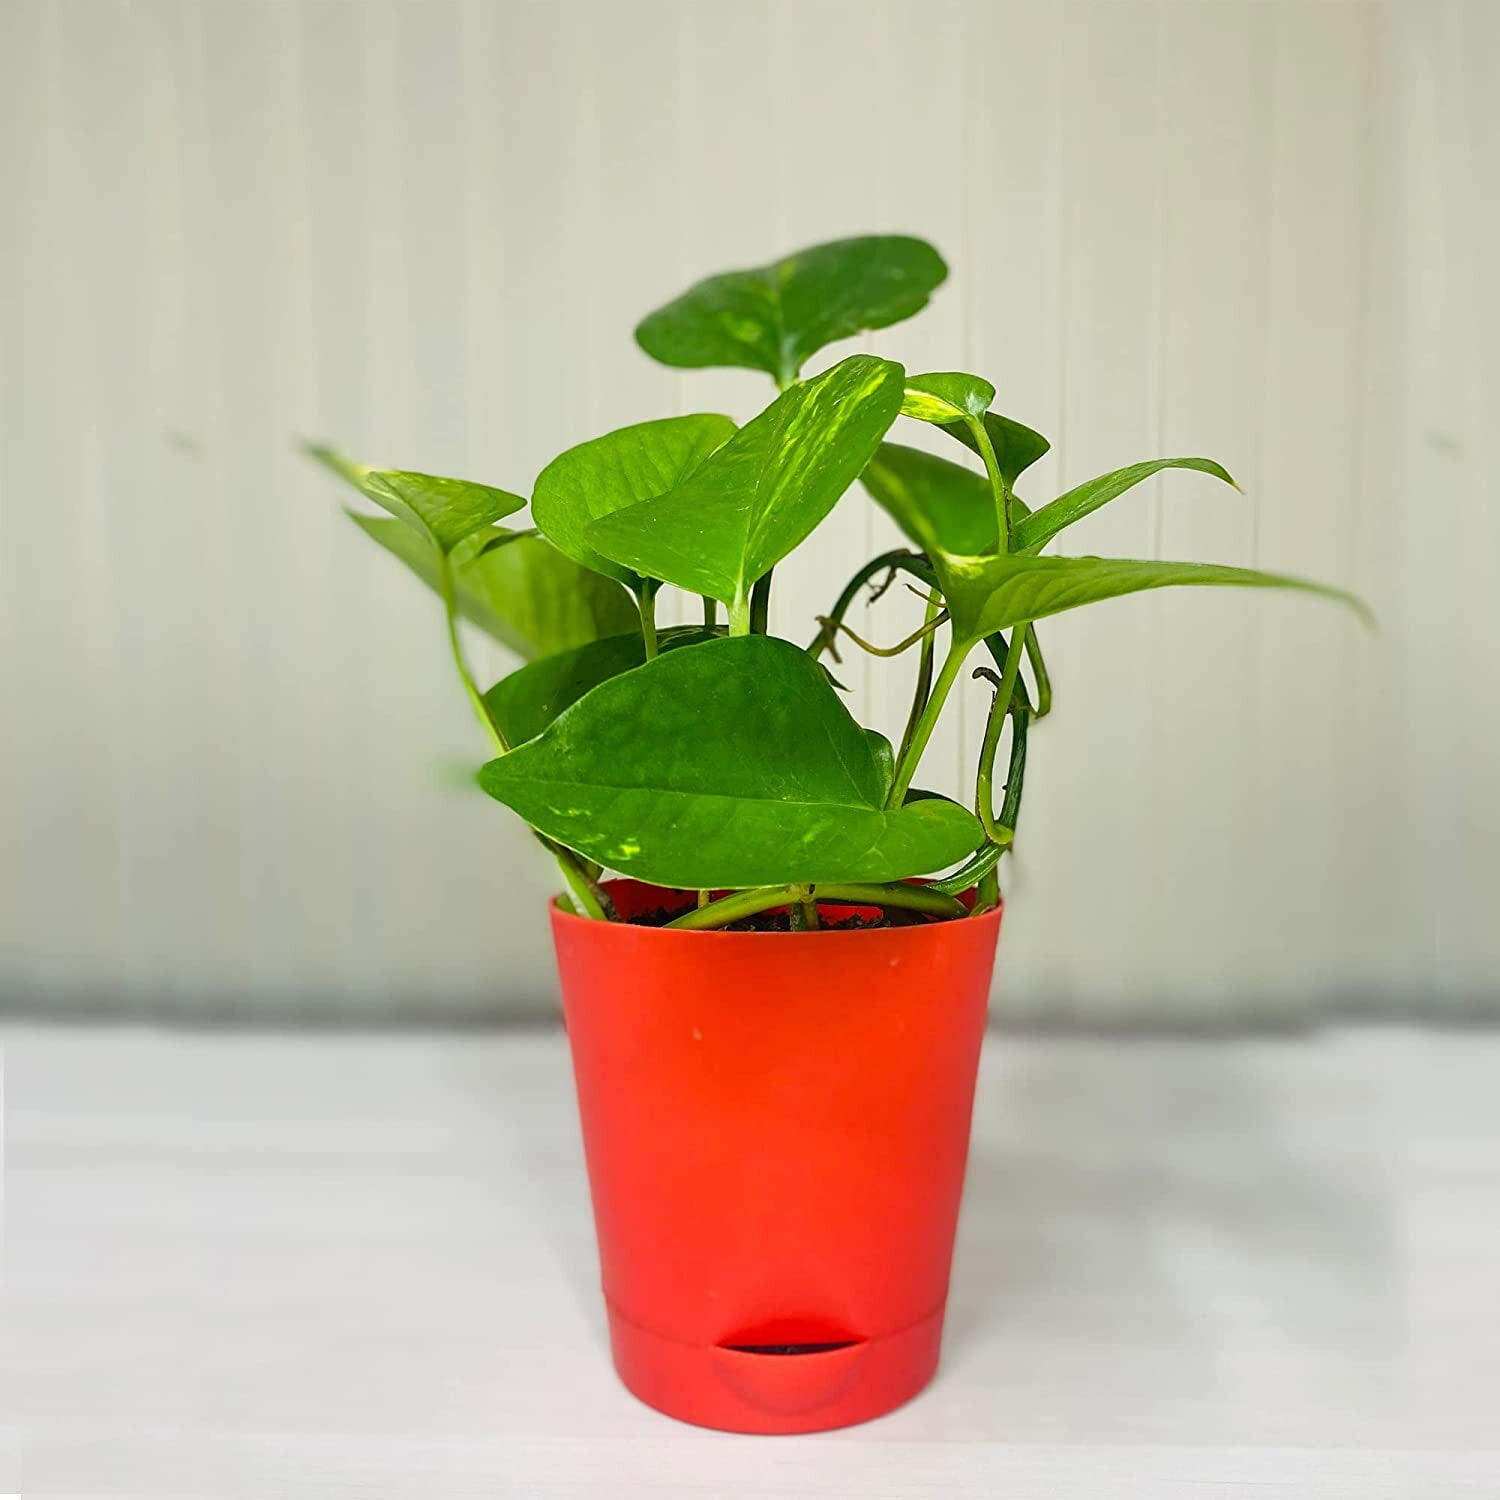 Why Should You Grow Money Plant in Your Home?